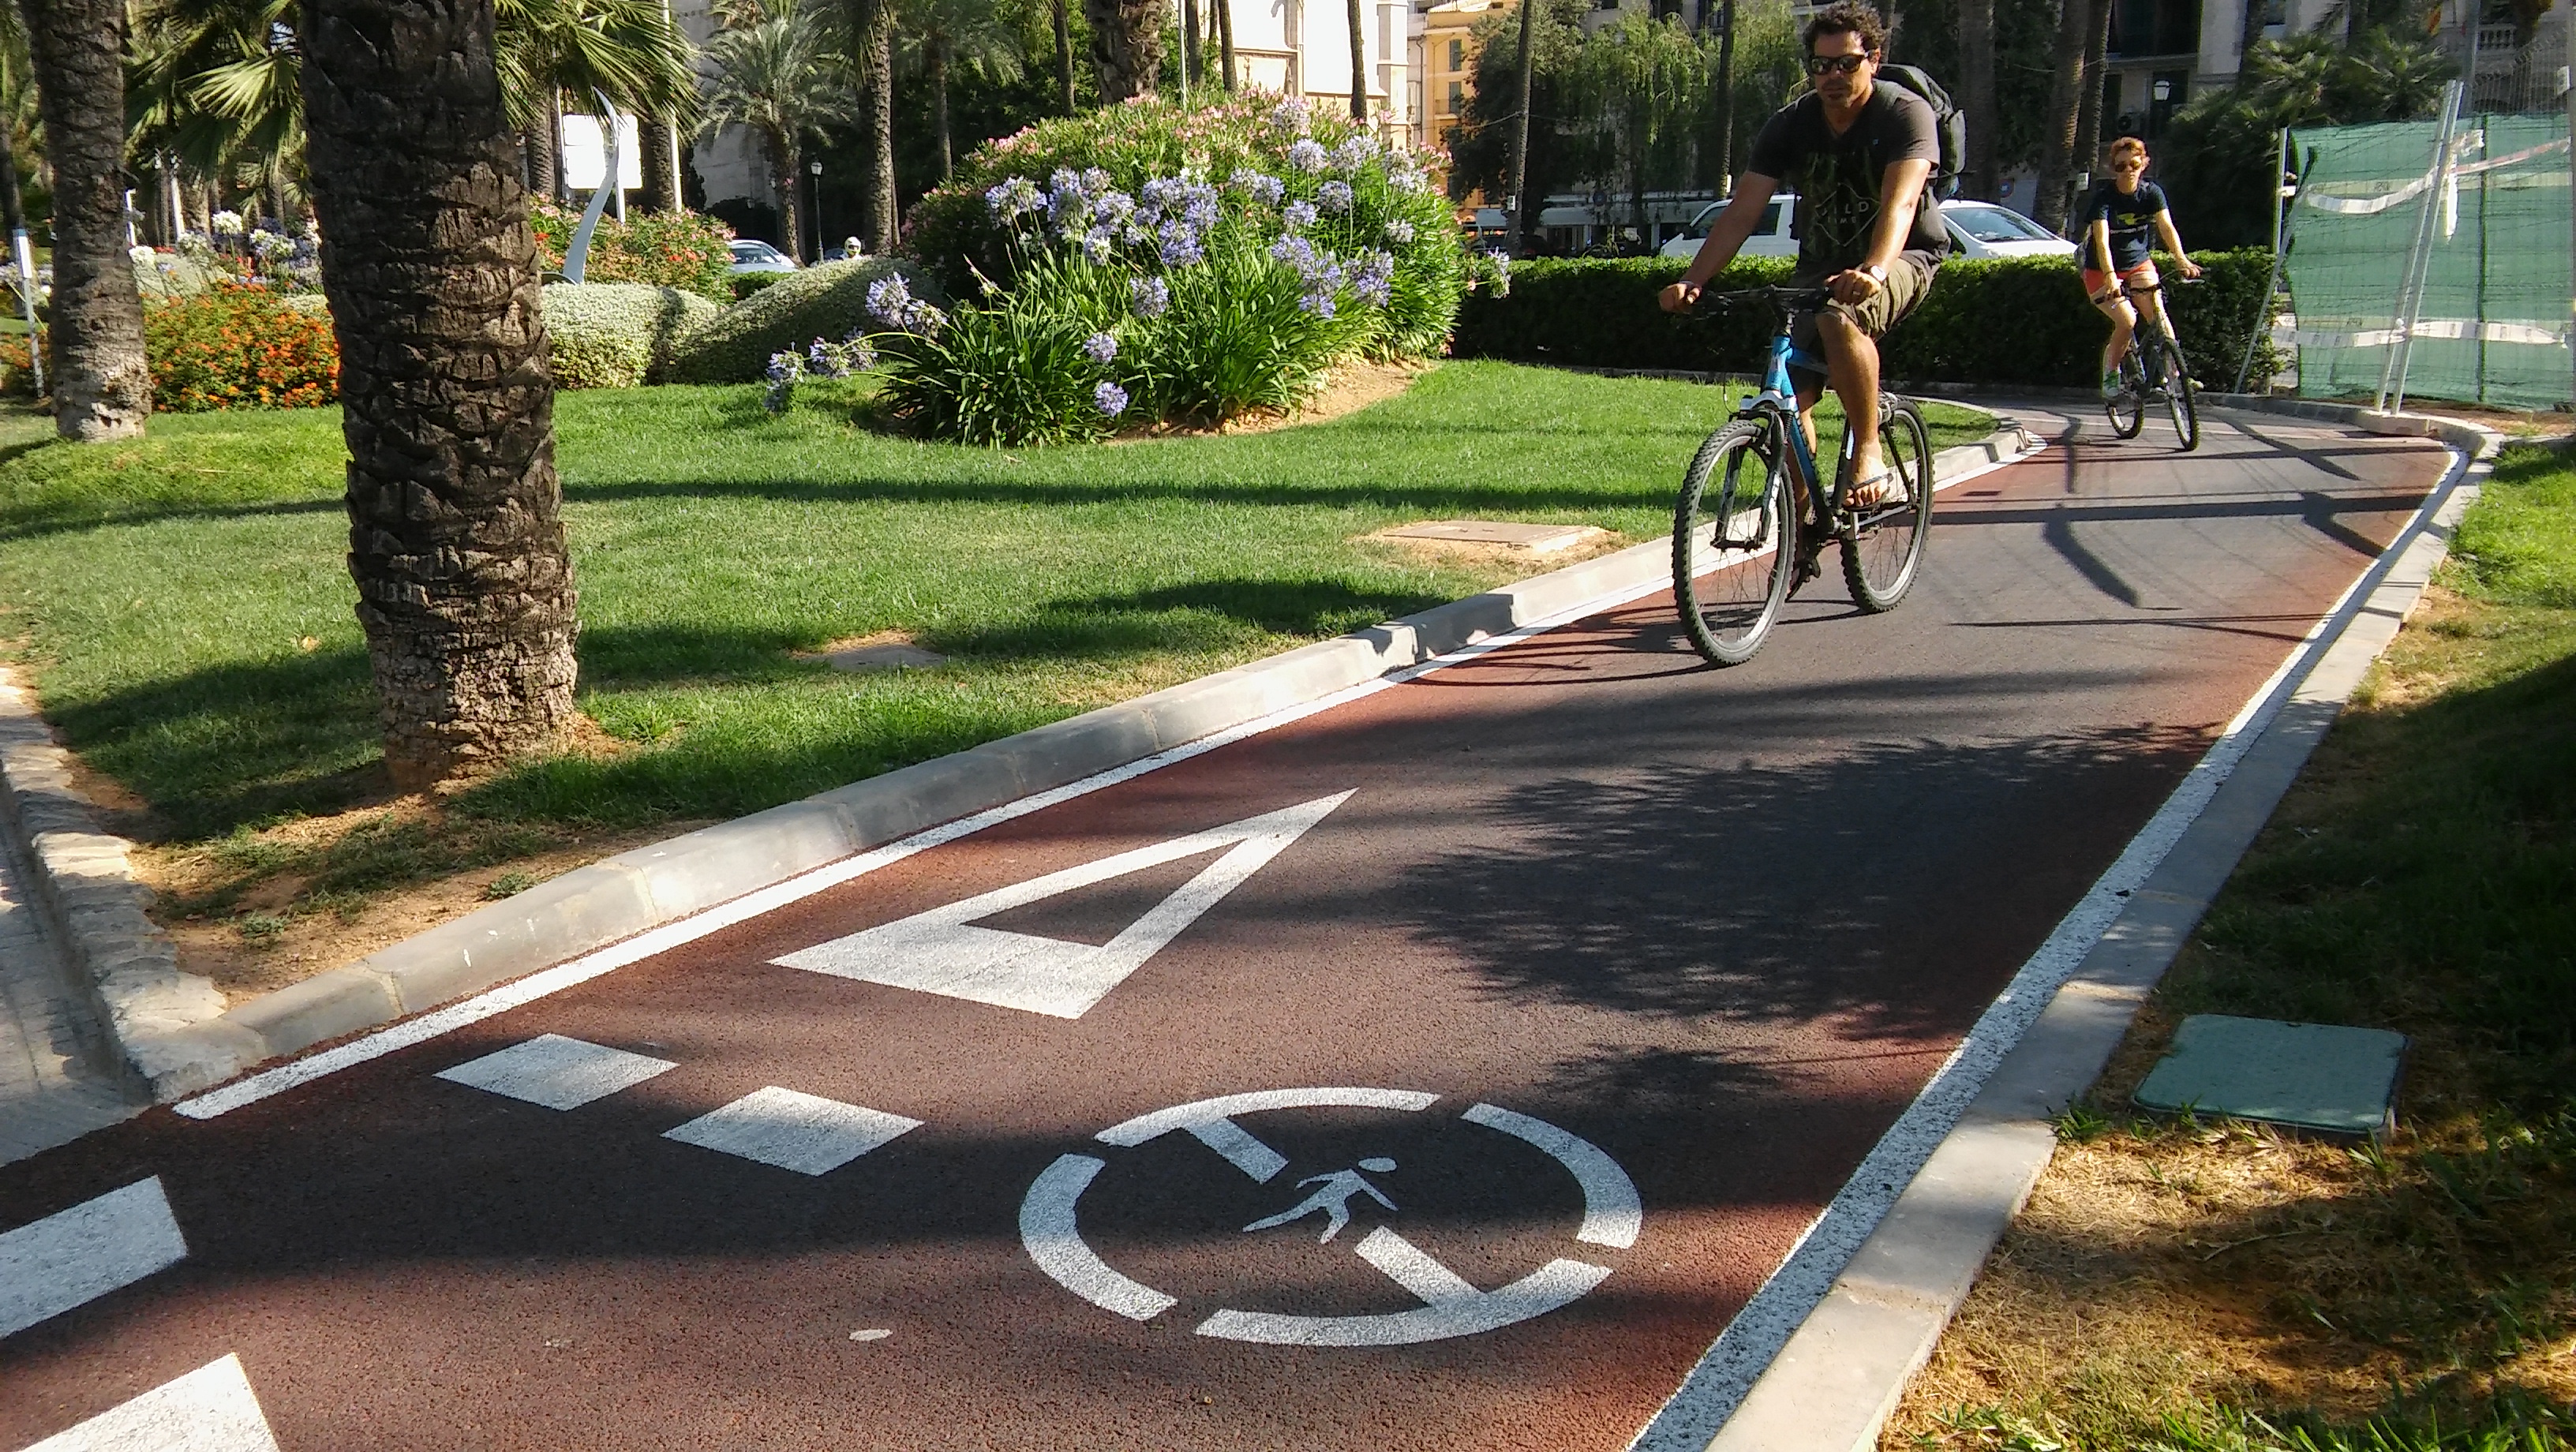 The APB to modernise the bike lane at the Port of Palma